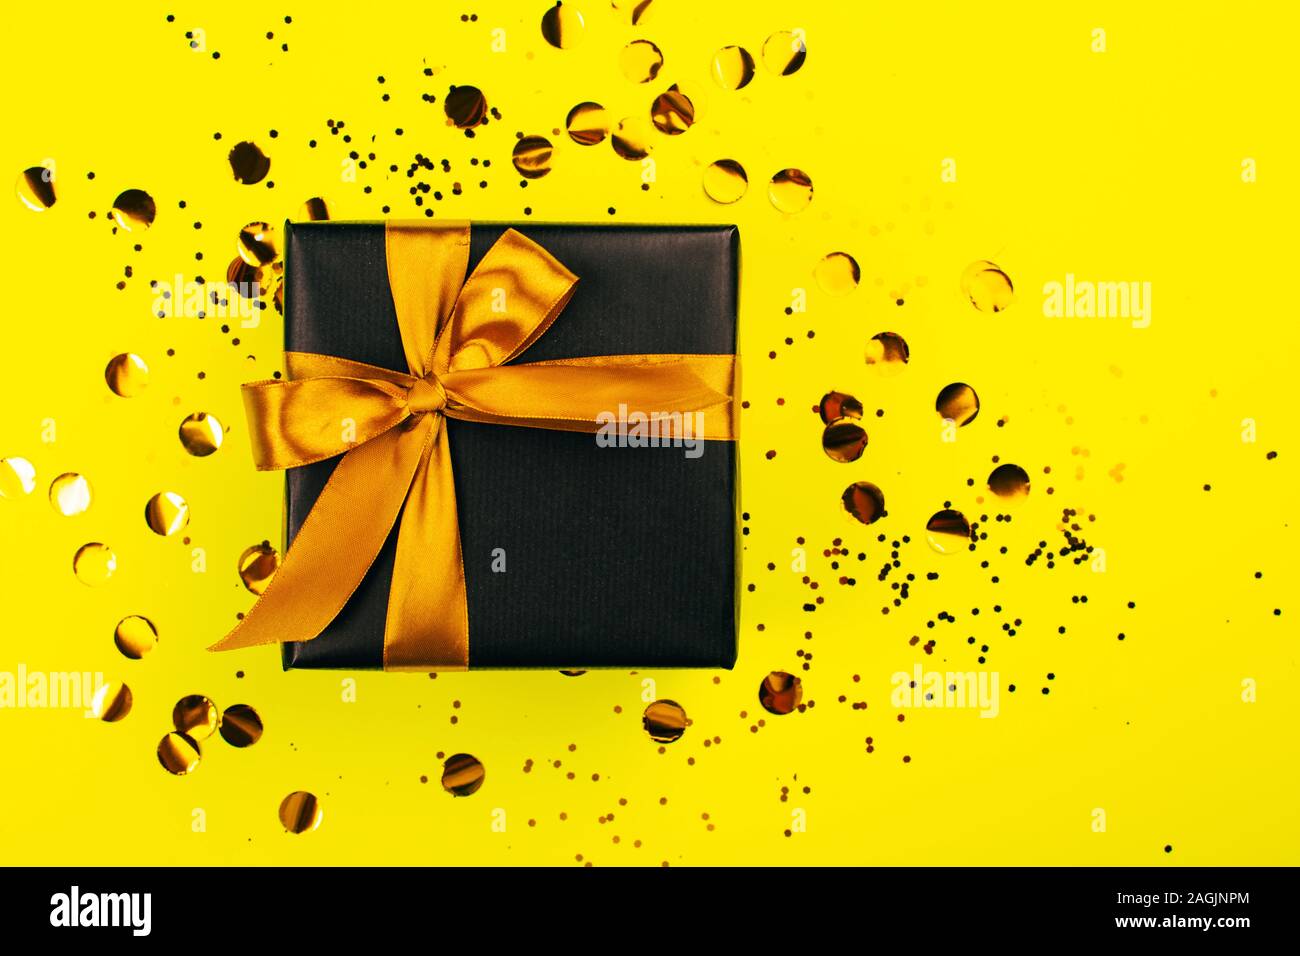 Black gift box with golden bow on yellow background with glitter. Holiday  concept Stock Photo - Alamy